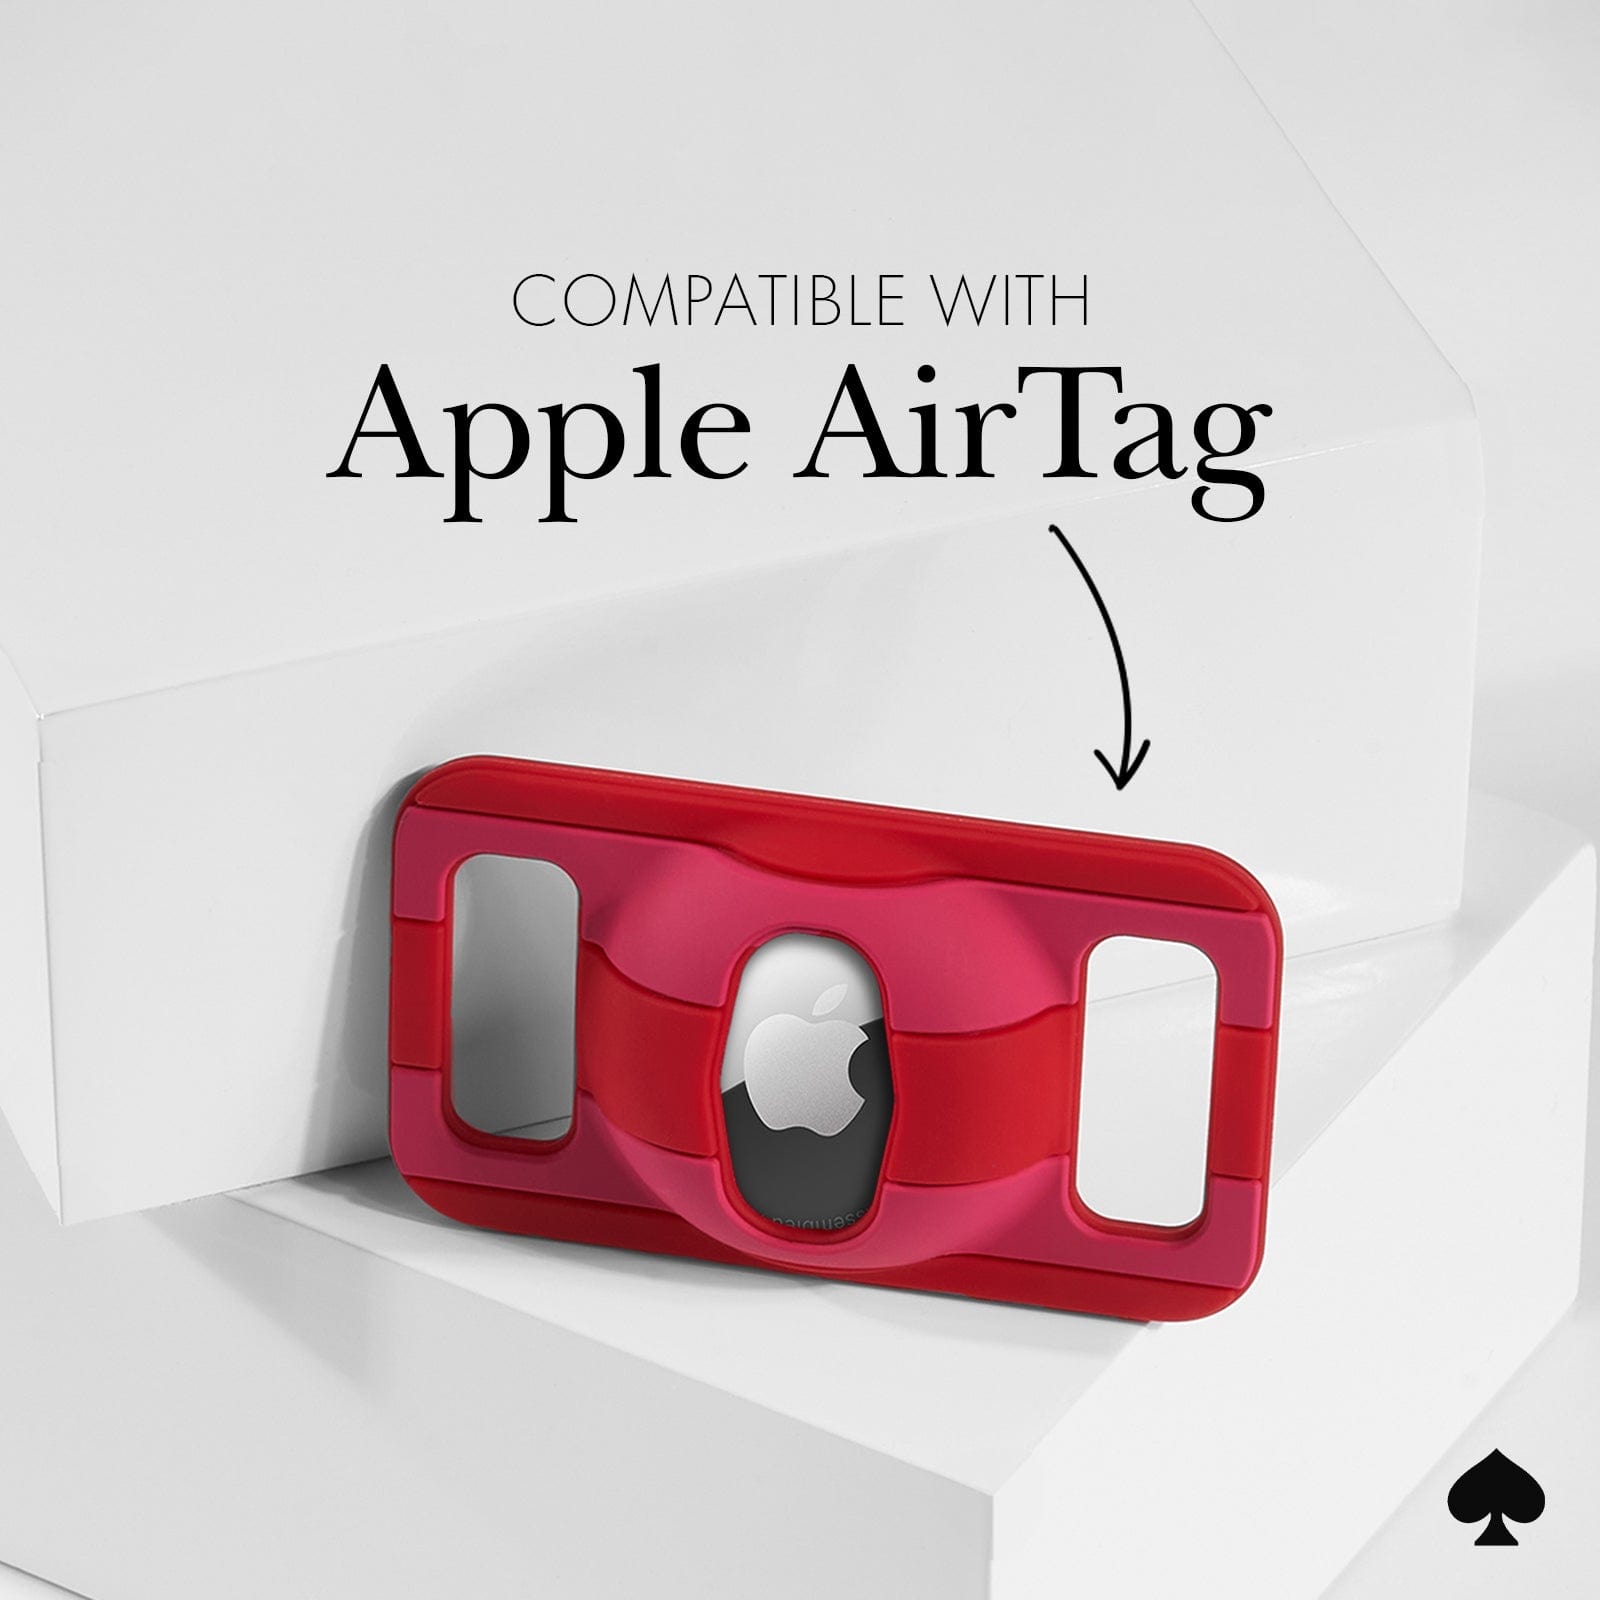 COMPATIBLE WITH APPLE AIRTAG